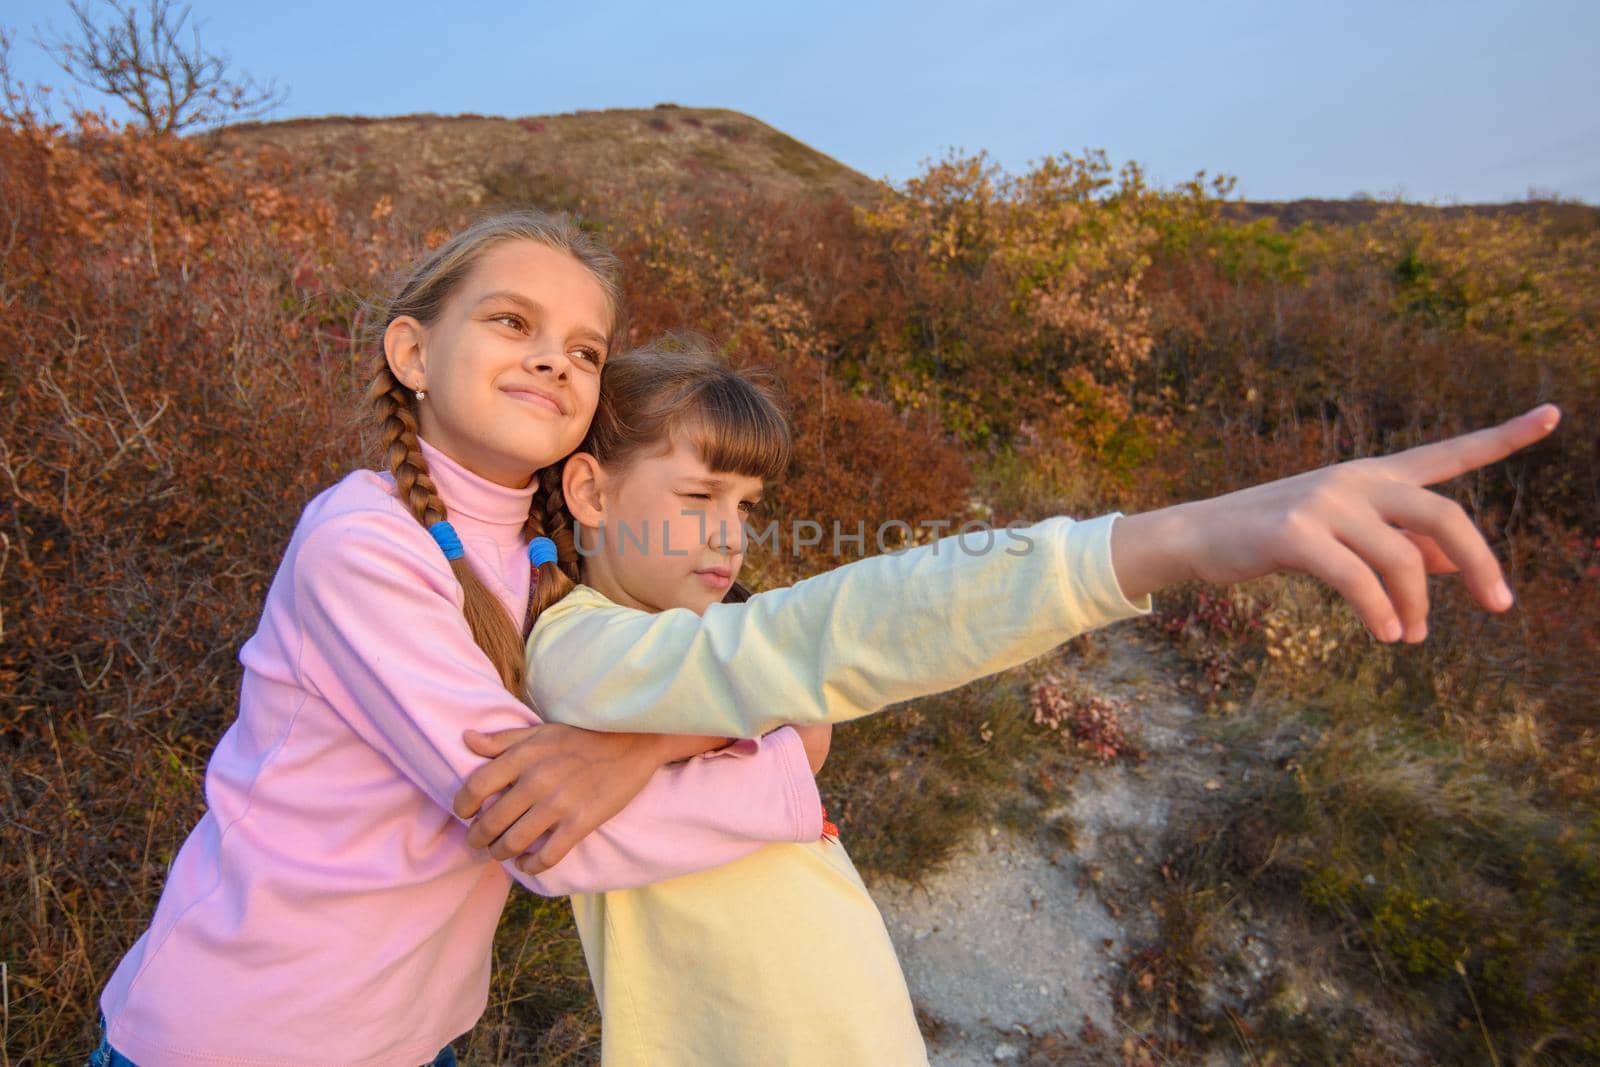 The girl hugs her sister who points her finger into the distance